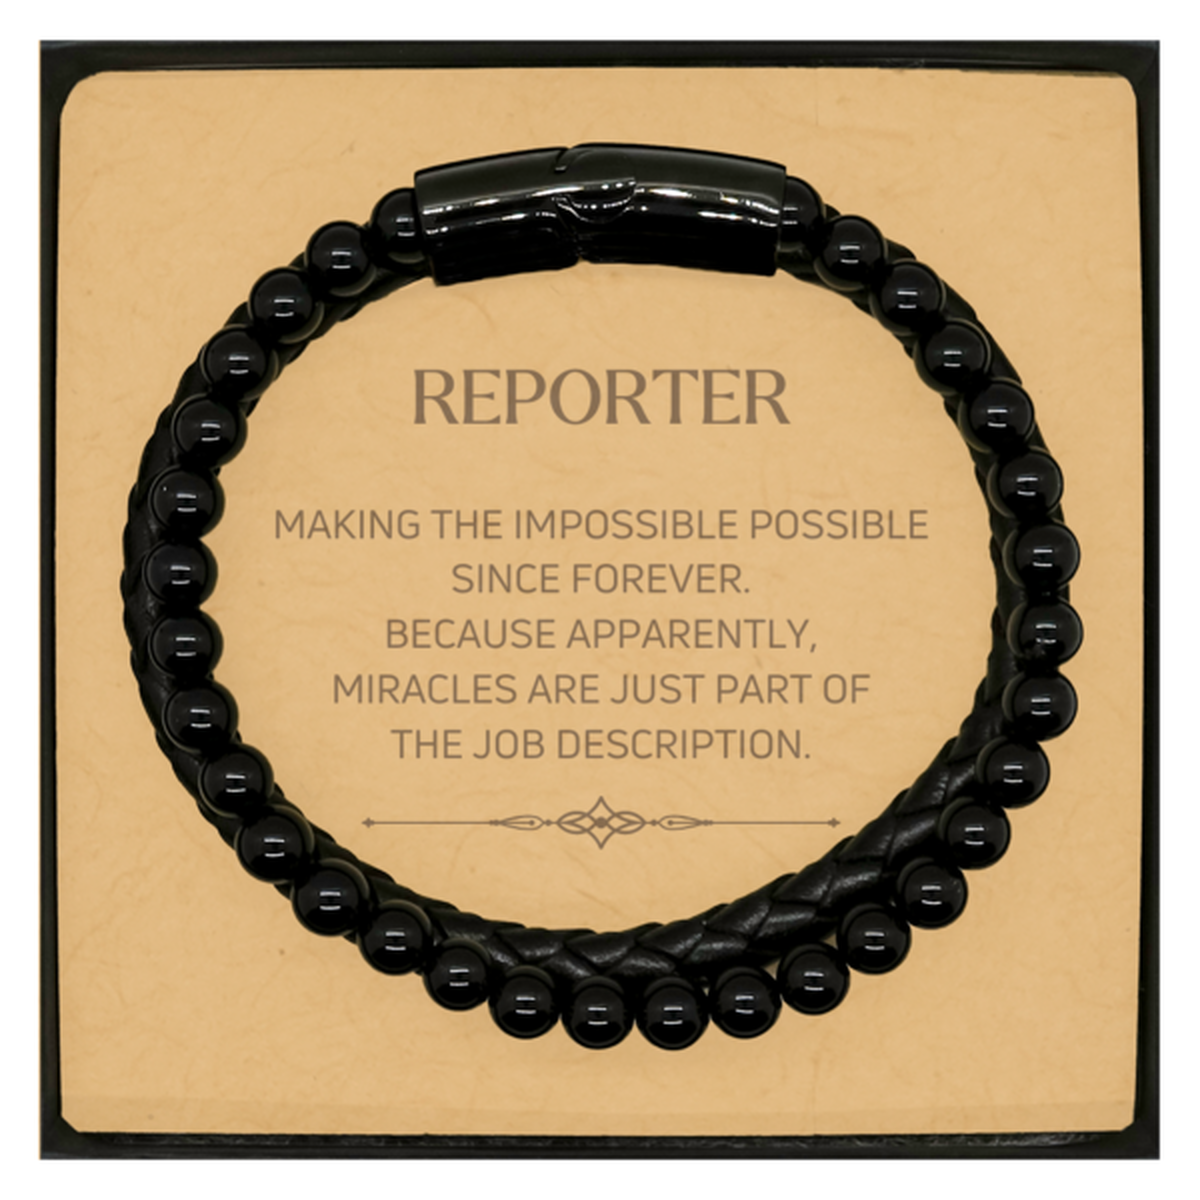 Funny Reporter Gifts, Miracles are just part of the job description, Inspirational Birthday Christmas Stone Leather Bracelets For Reporter, Men, Women, Coworkers, Friends, Boss